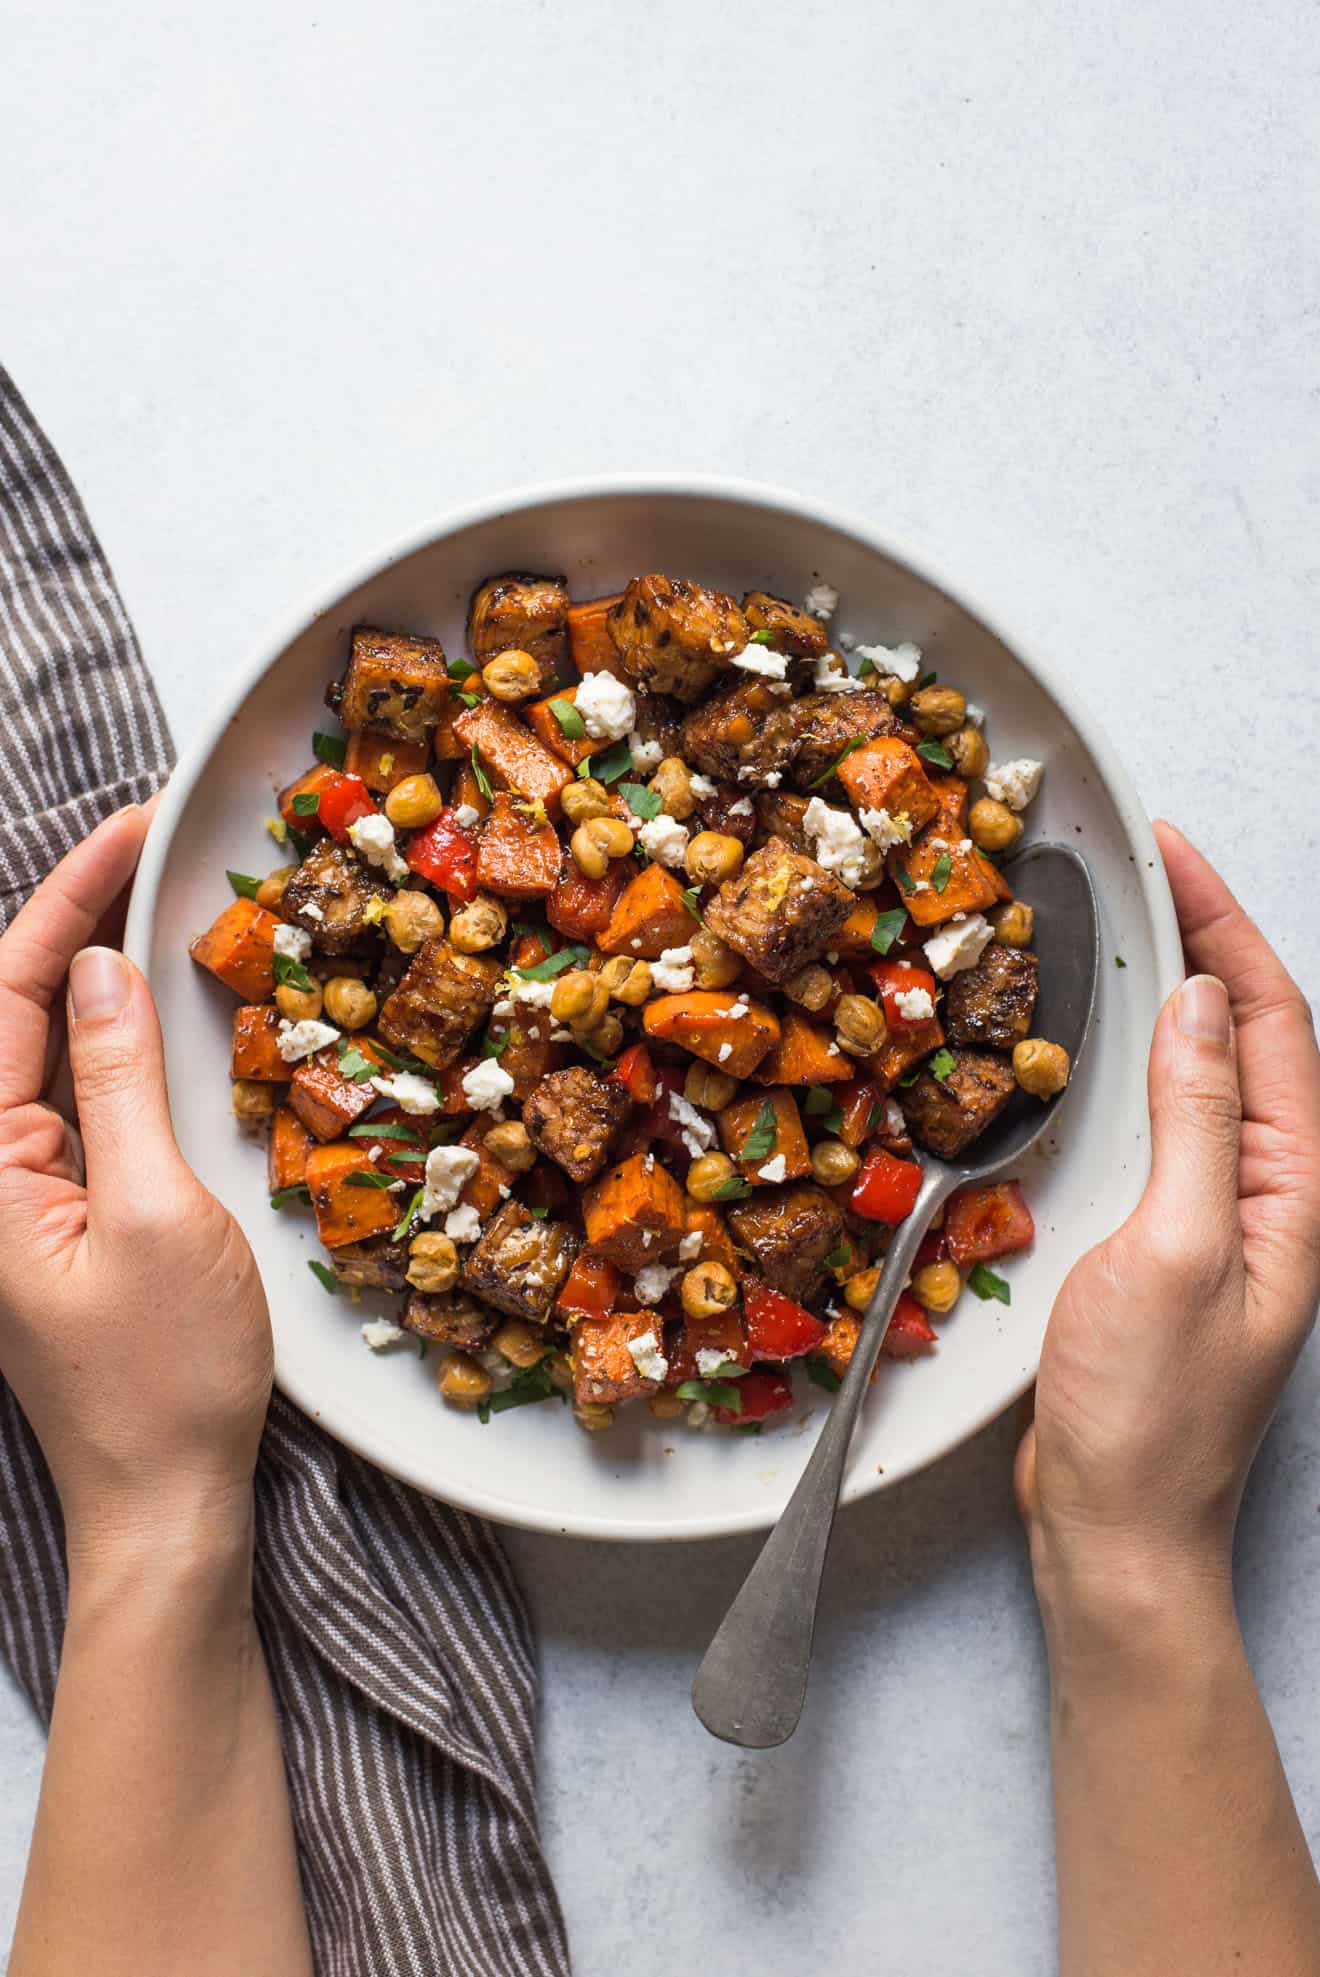 Roasted Tempeh with Tamarind Glaze, Sweet Potatoes and Roasted Chickpeas - an easy, healthy sheet pan dinner that's great for weeknights!